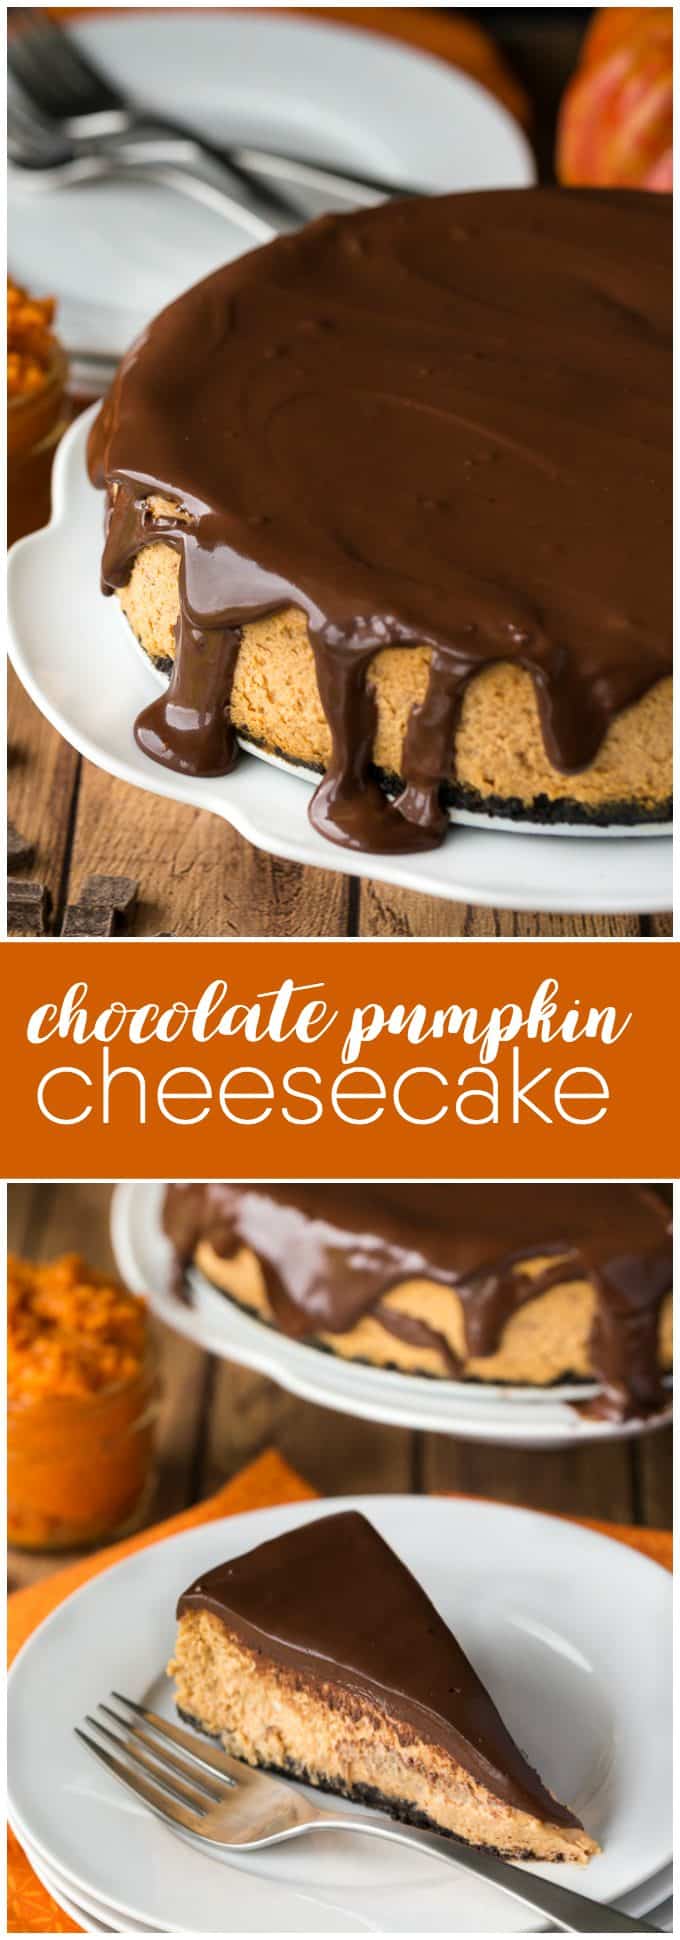 Chocolate Pumpkin Cheesecake - Prepared with a chocolate cookie crumb crust and a creamy, smooth pumpkin cheesecake filling. Topped off with a thick chocolate ganache, this is one scrumptious cheesecake. It tastes even better than it looks!